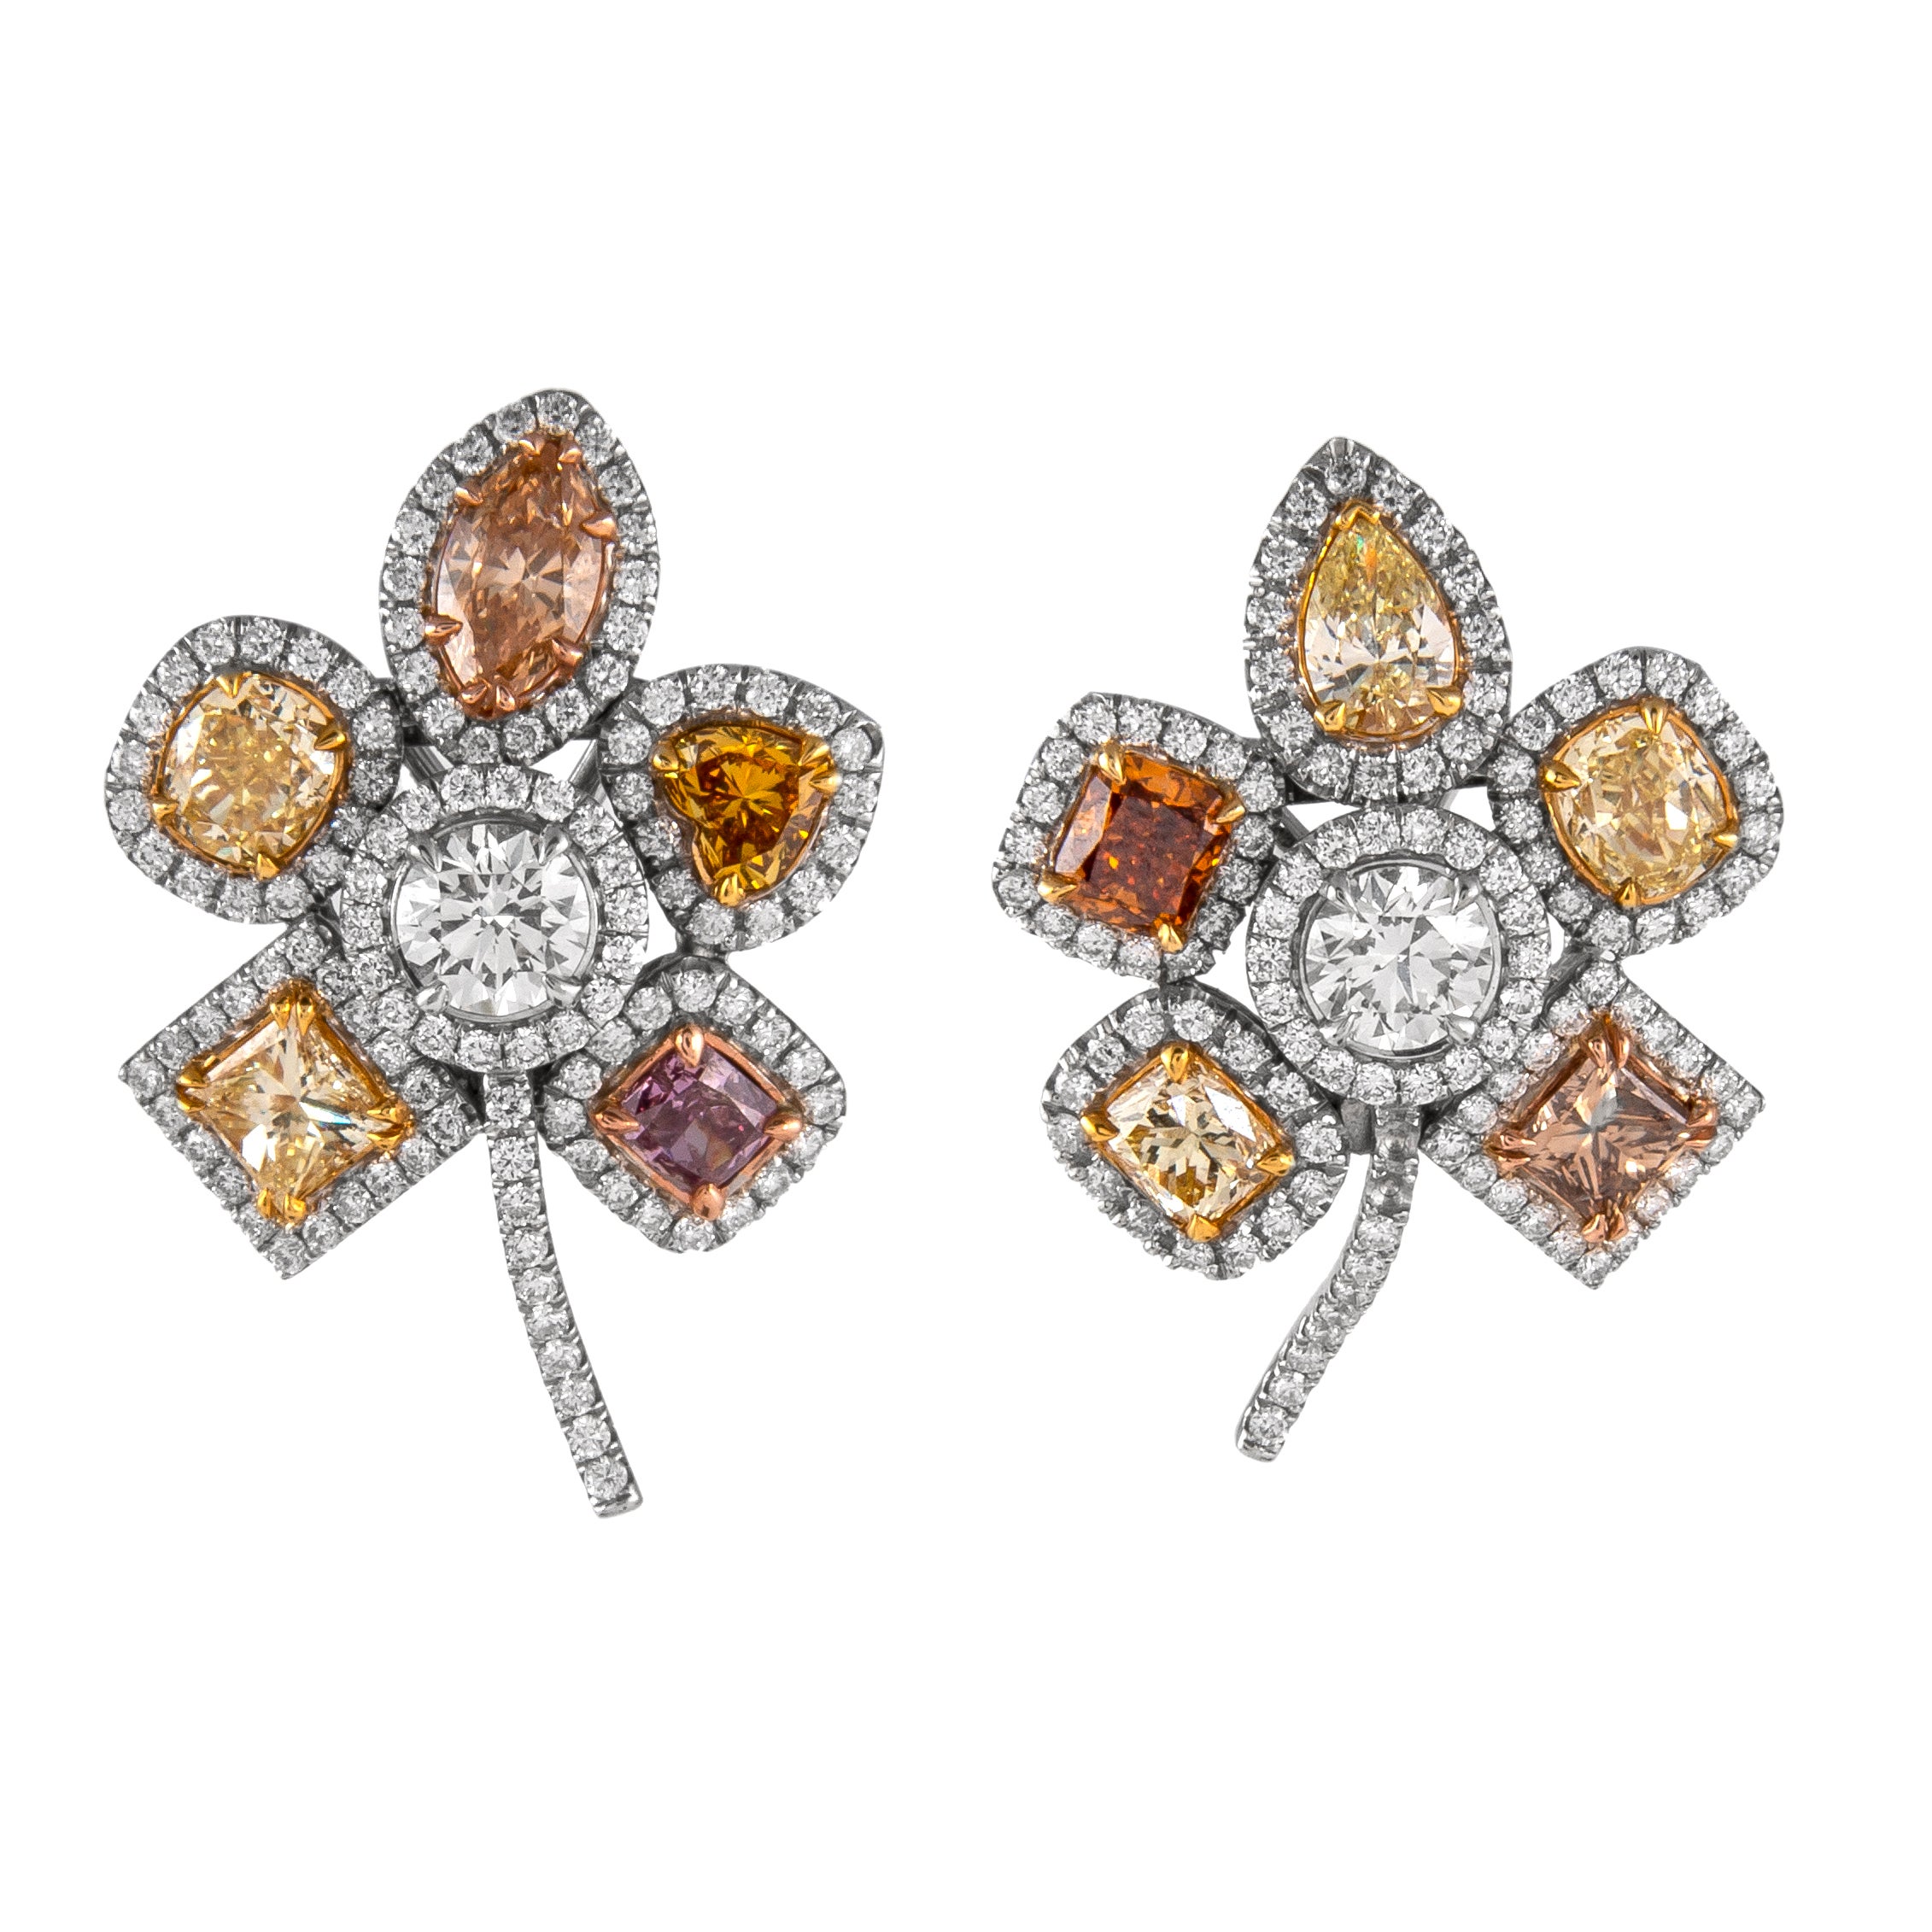 Alexander Beverly Hills GIA 8.21ct Fancy Color Diamond Floral Earrings Or 18k